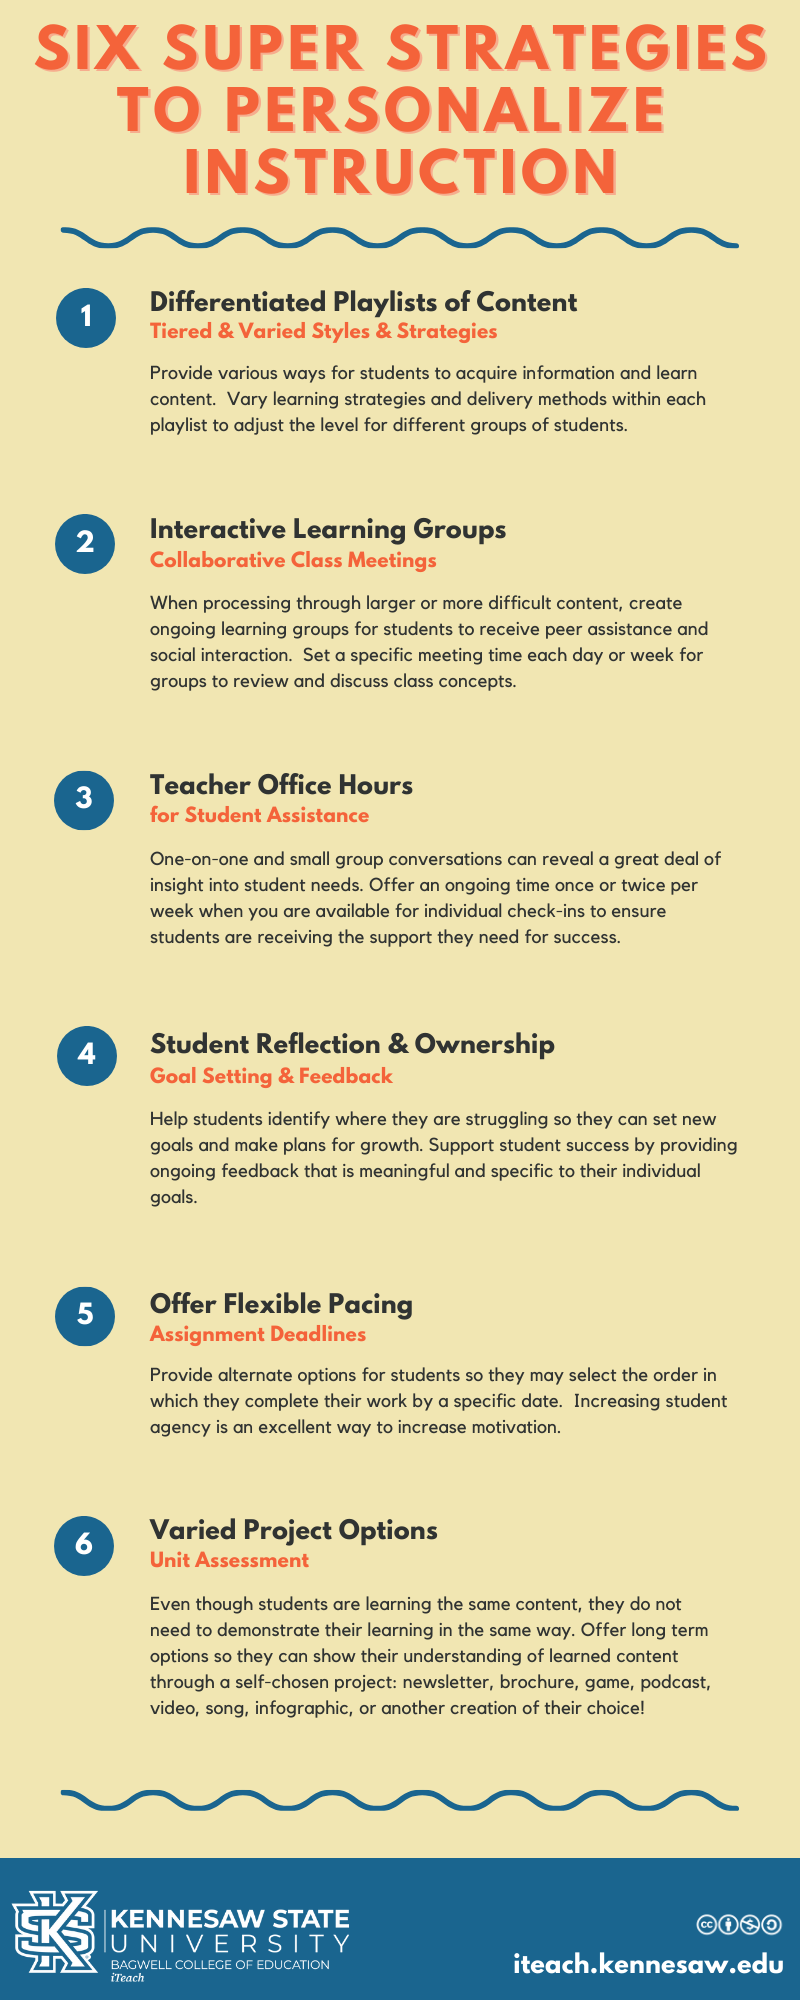 6 Strategies to Personalize Instruction.png